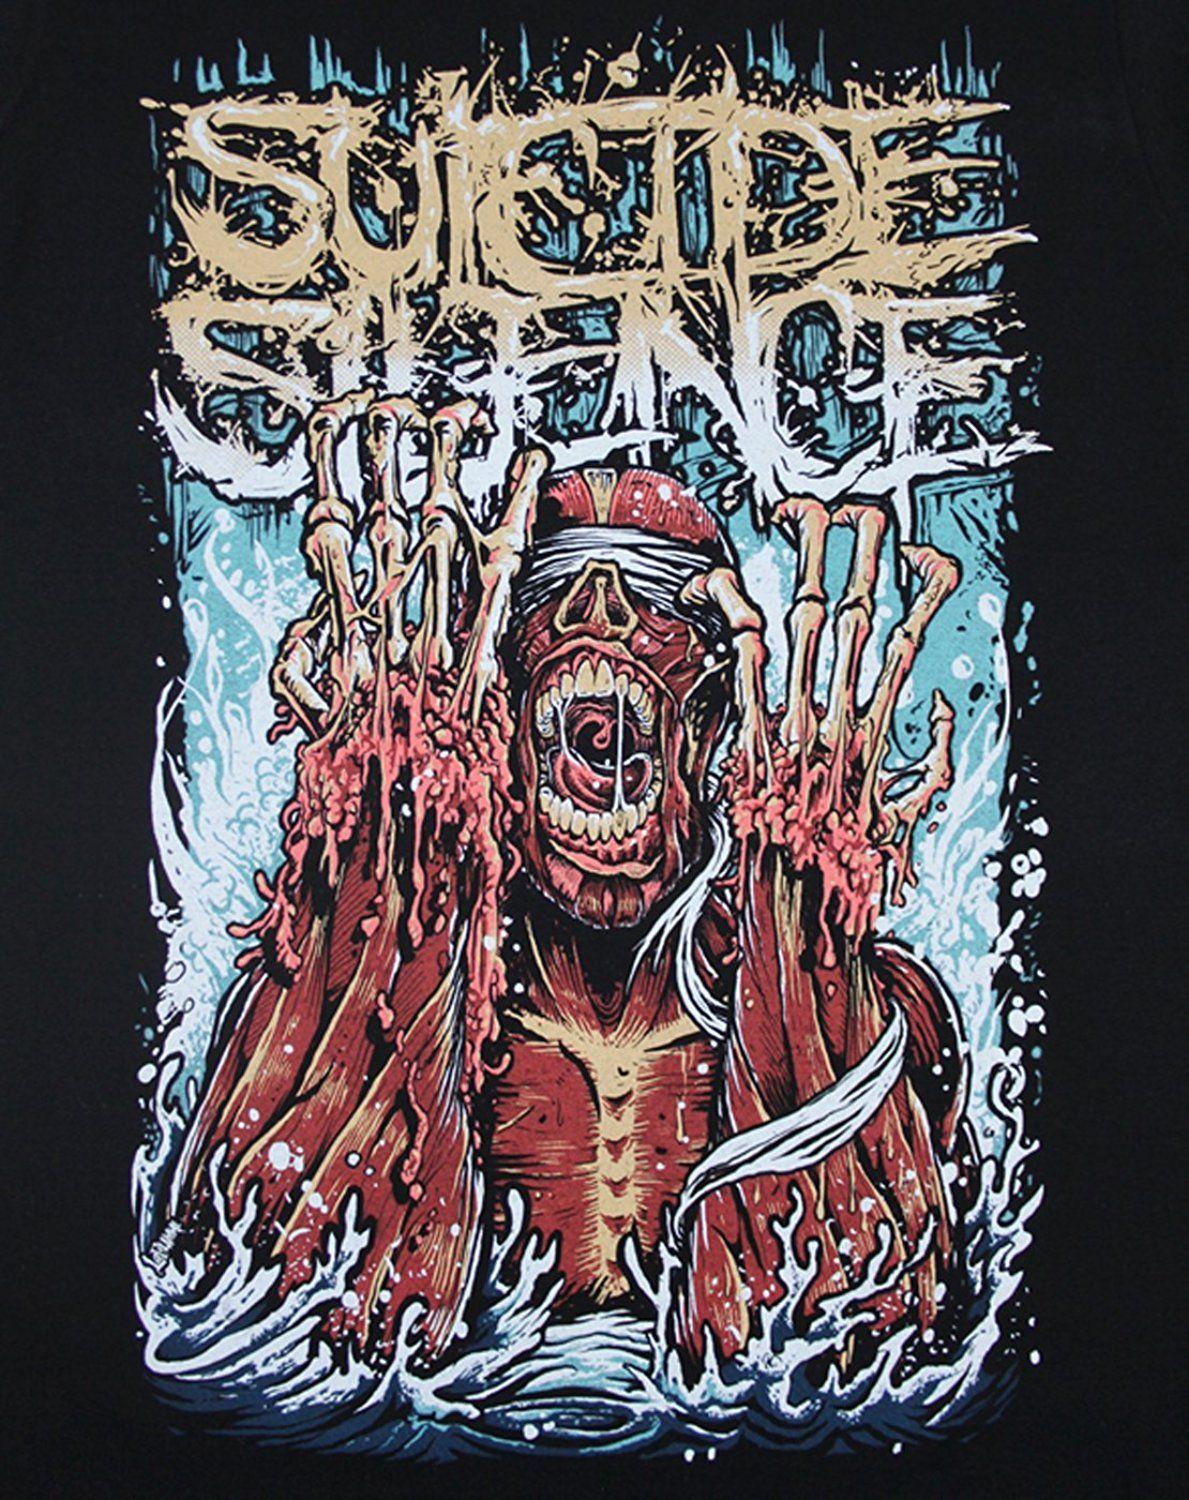 Official Suicide Silence Meltdown Men's T Shirt: Clothing